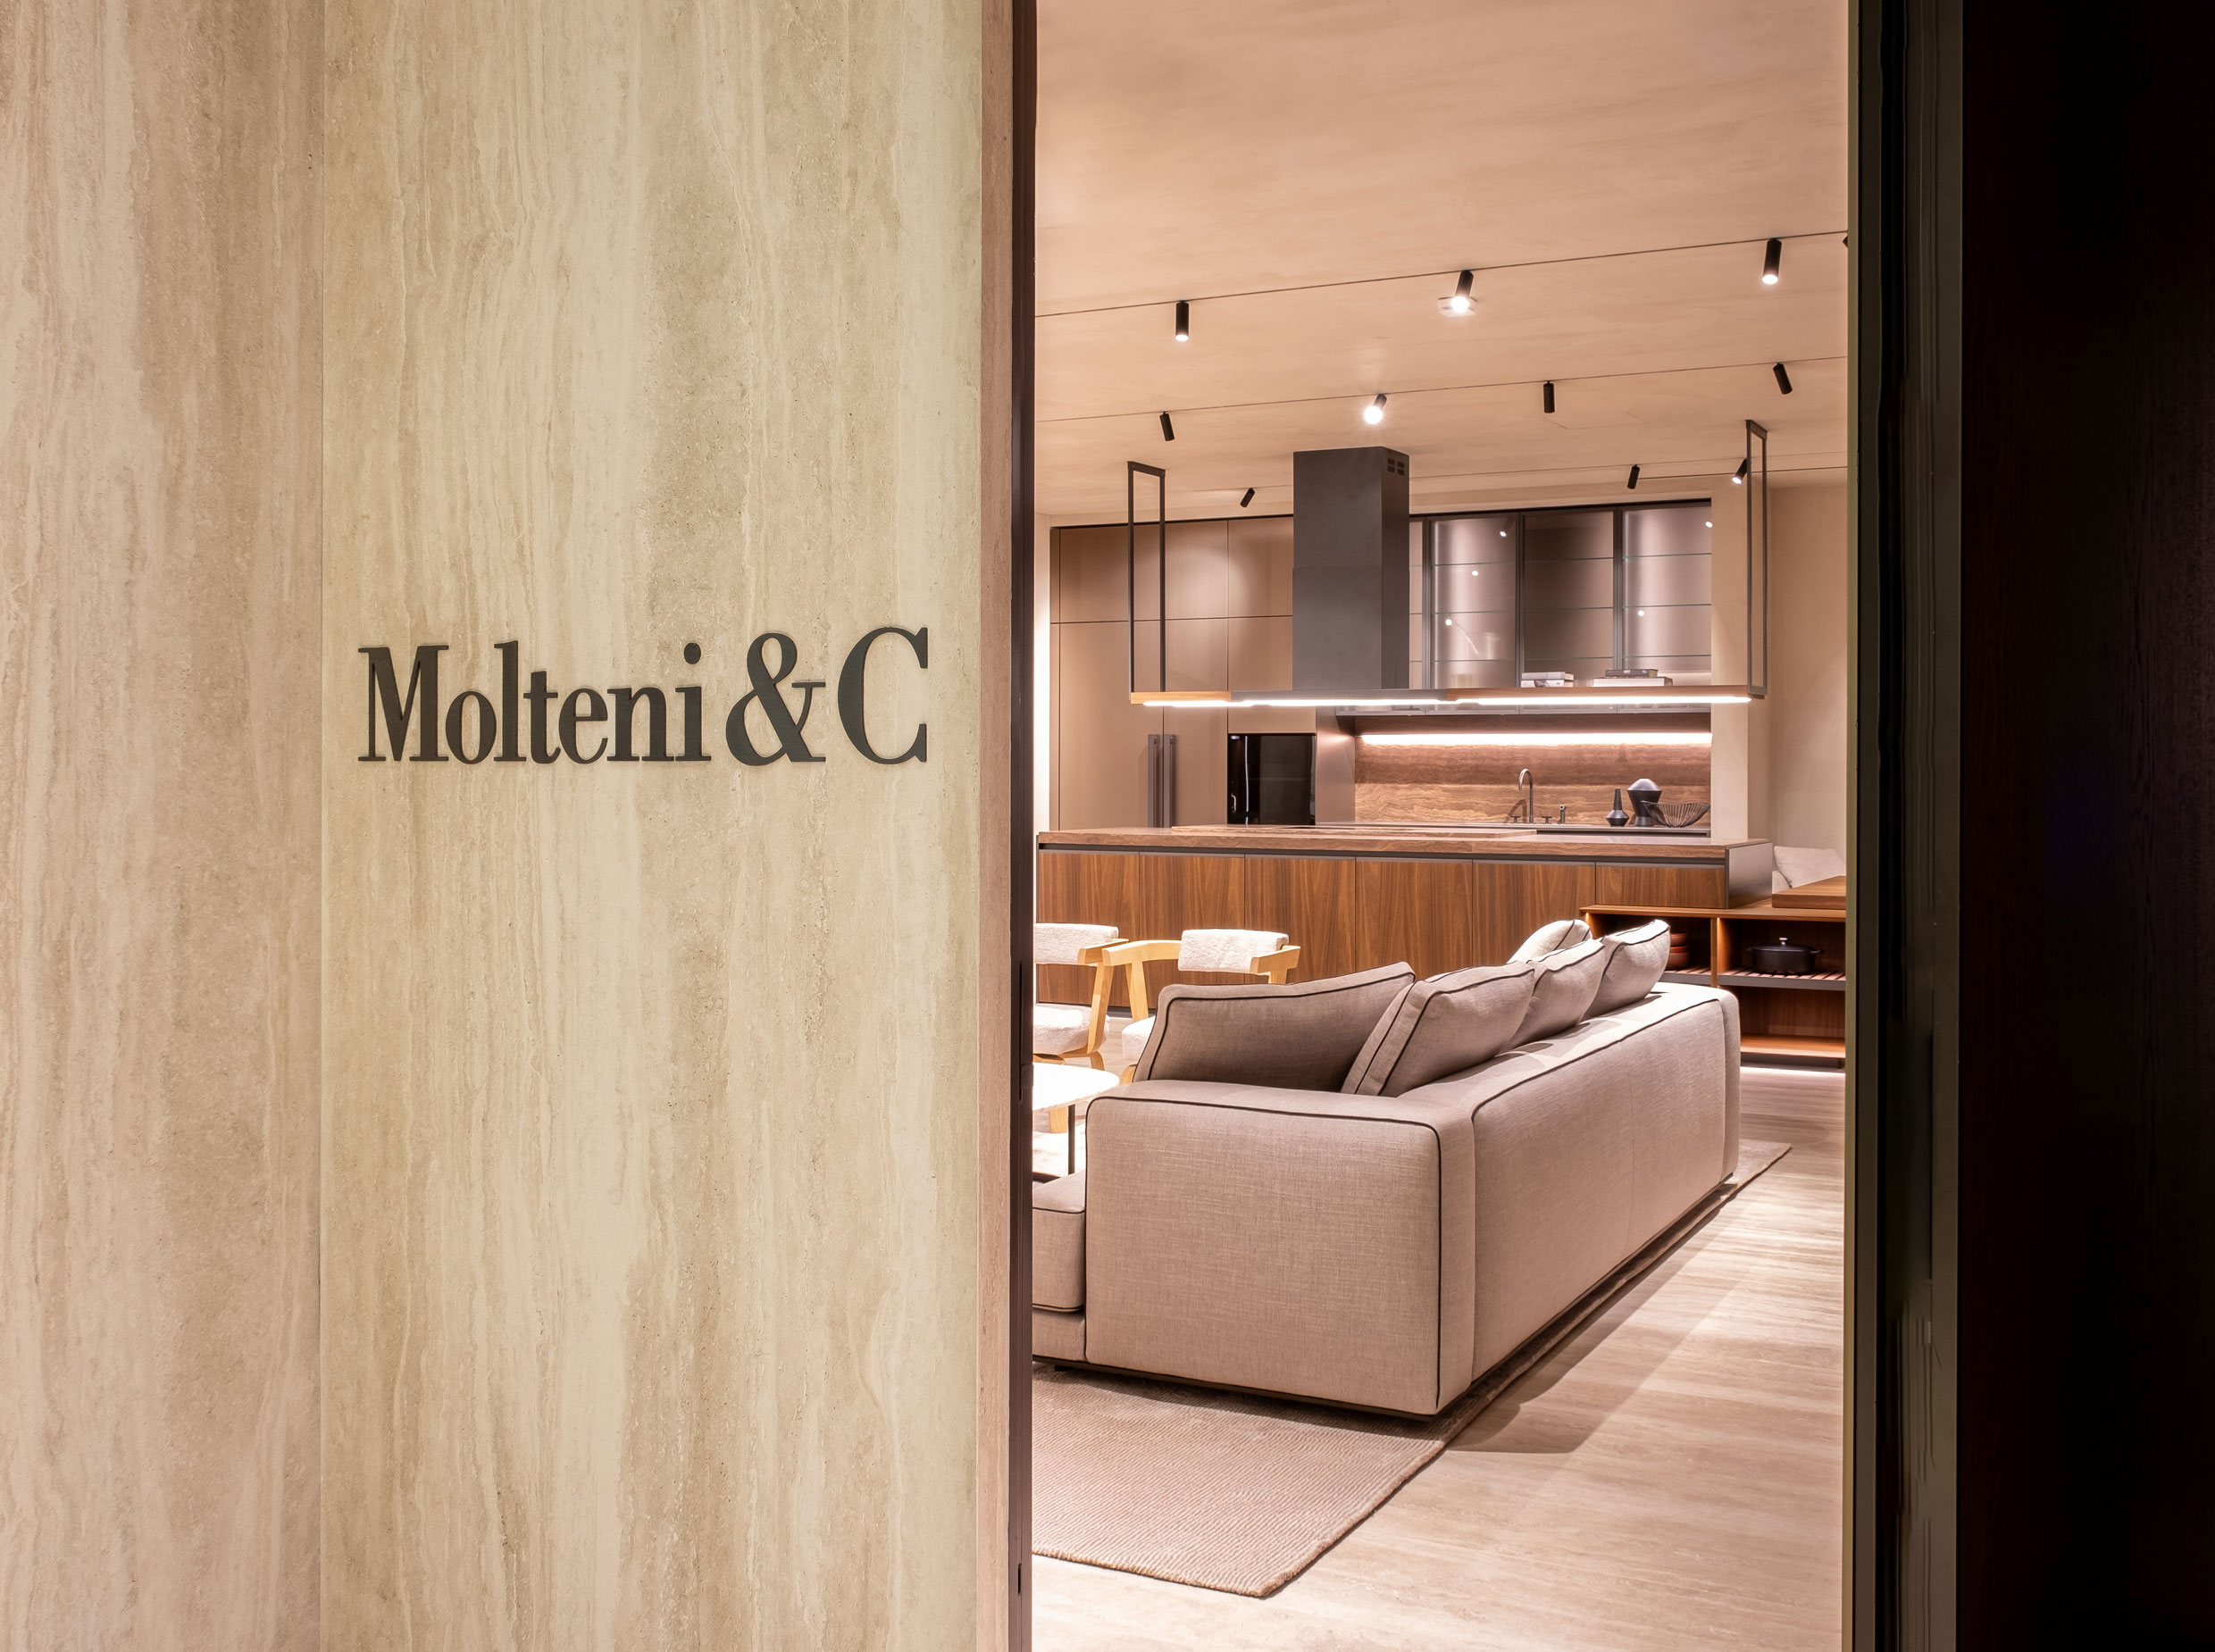 Molteni&C Flagship Store Opens in Cyprus